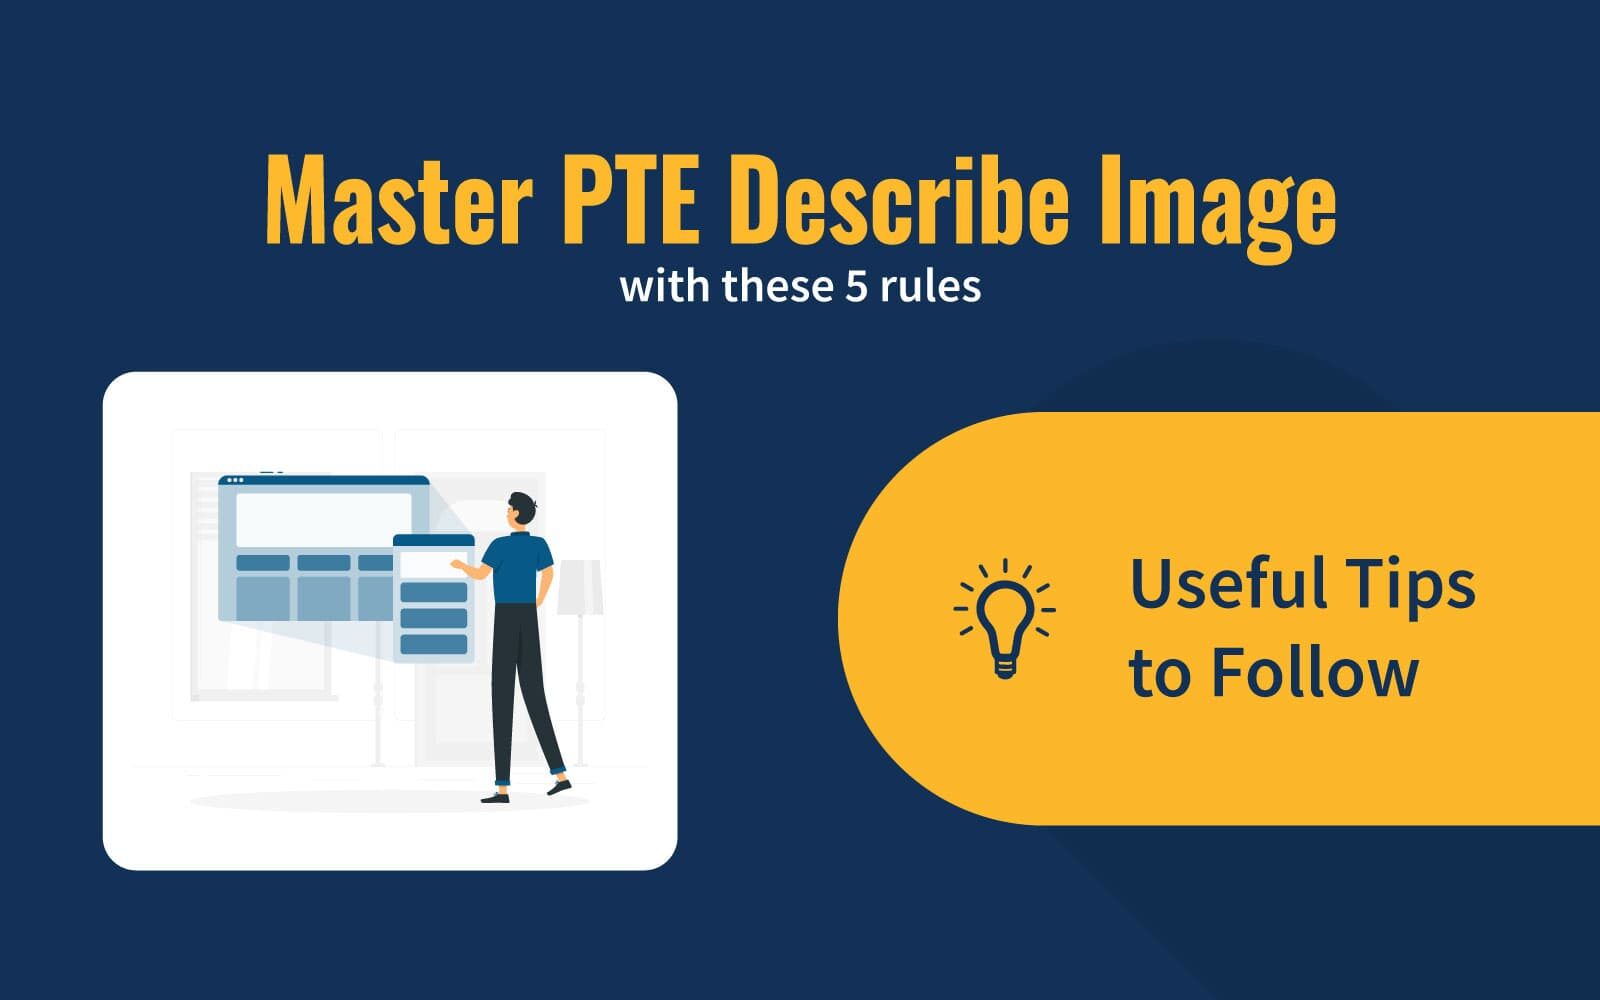 Master PTE Describe Image with these 5 rules